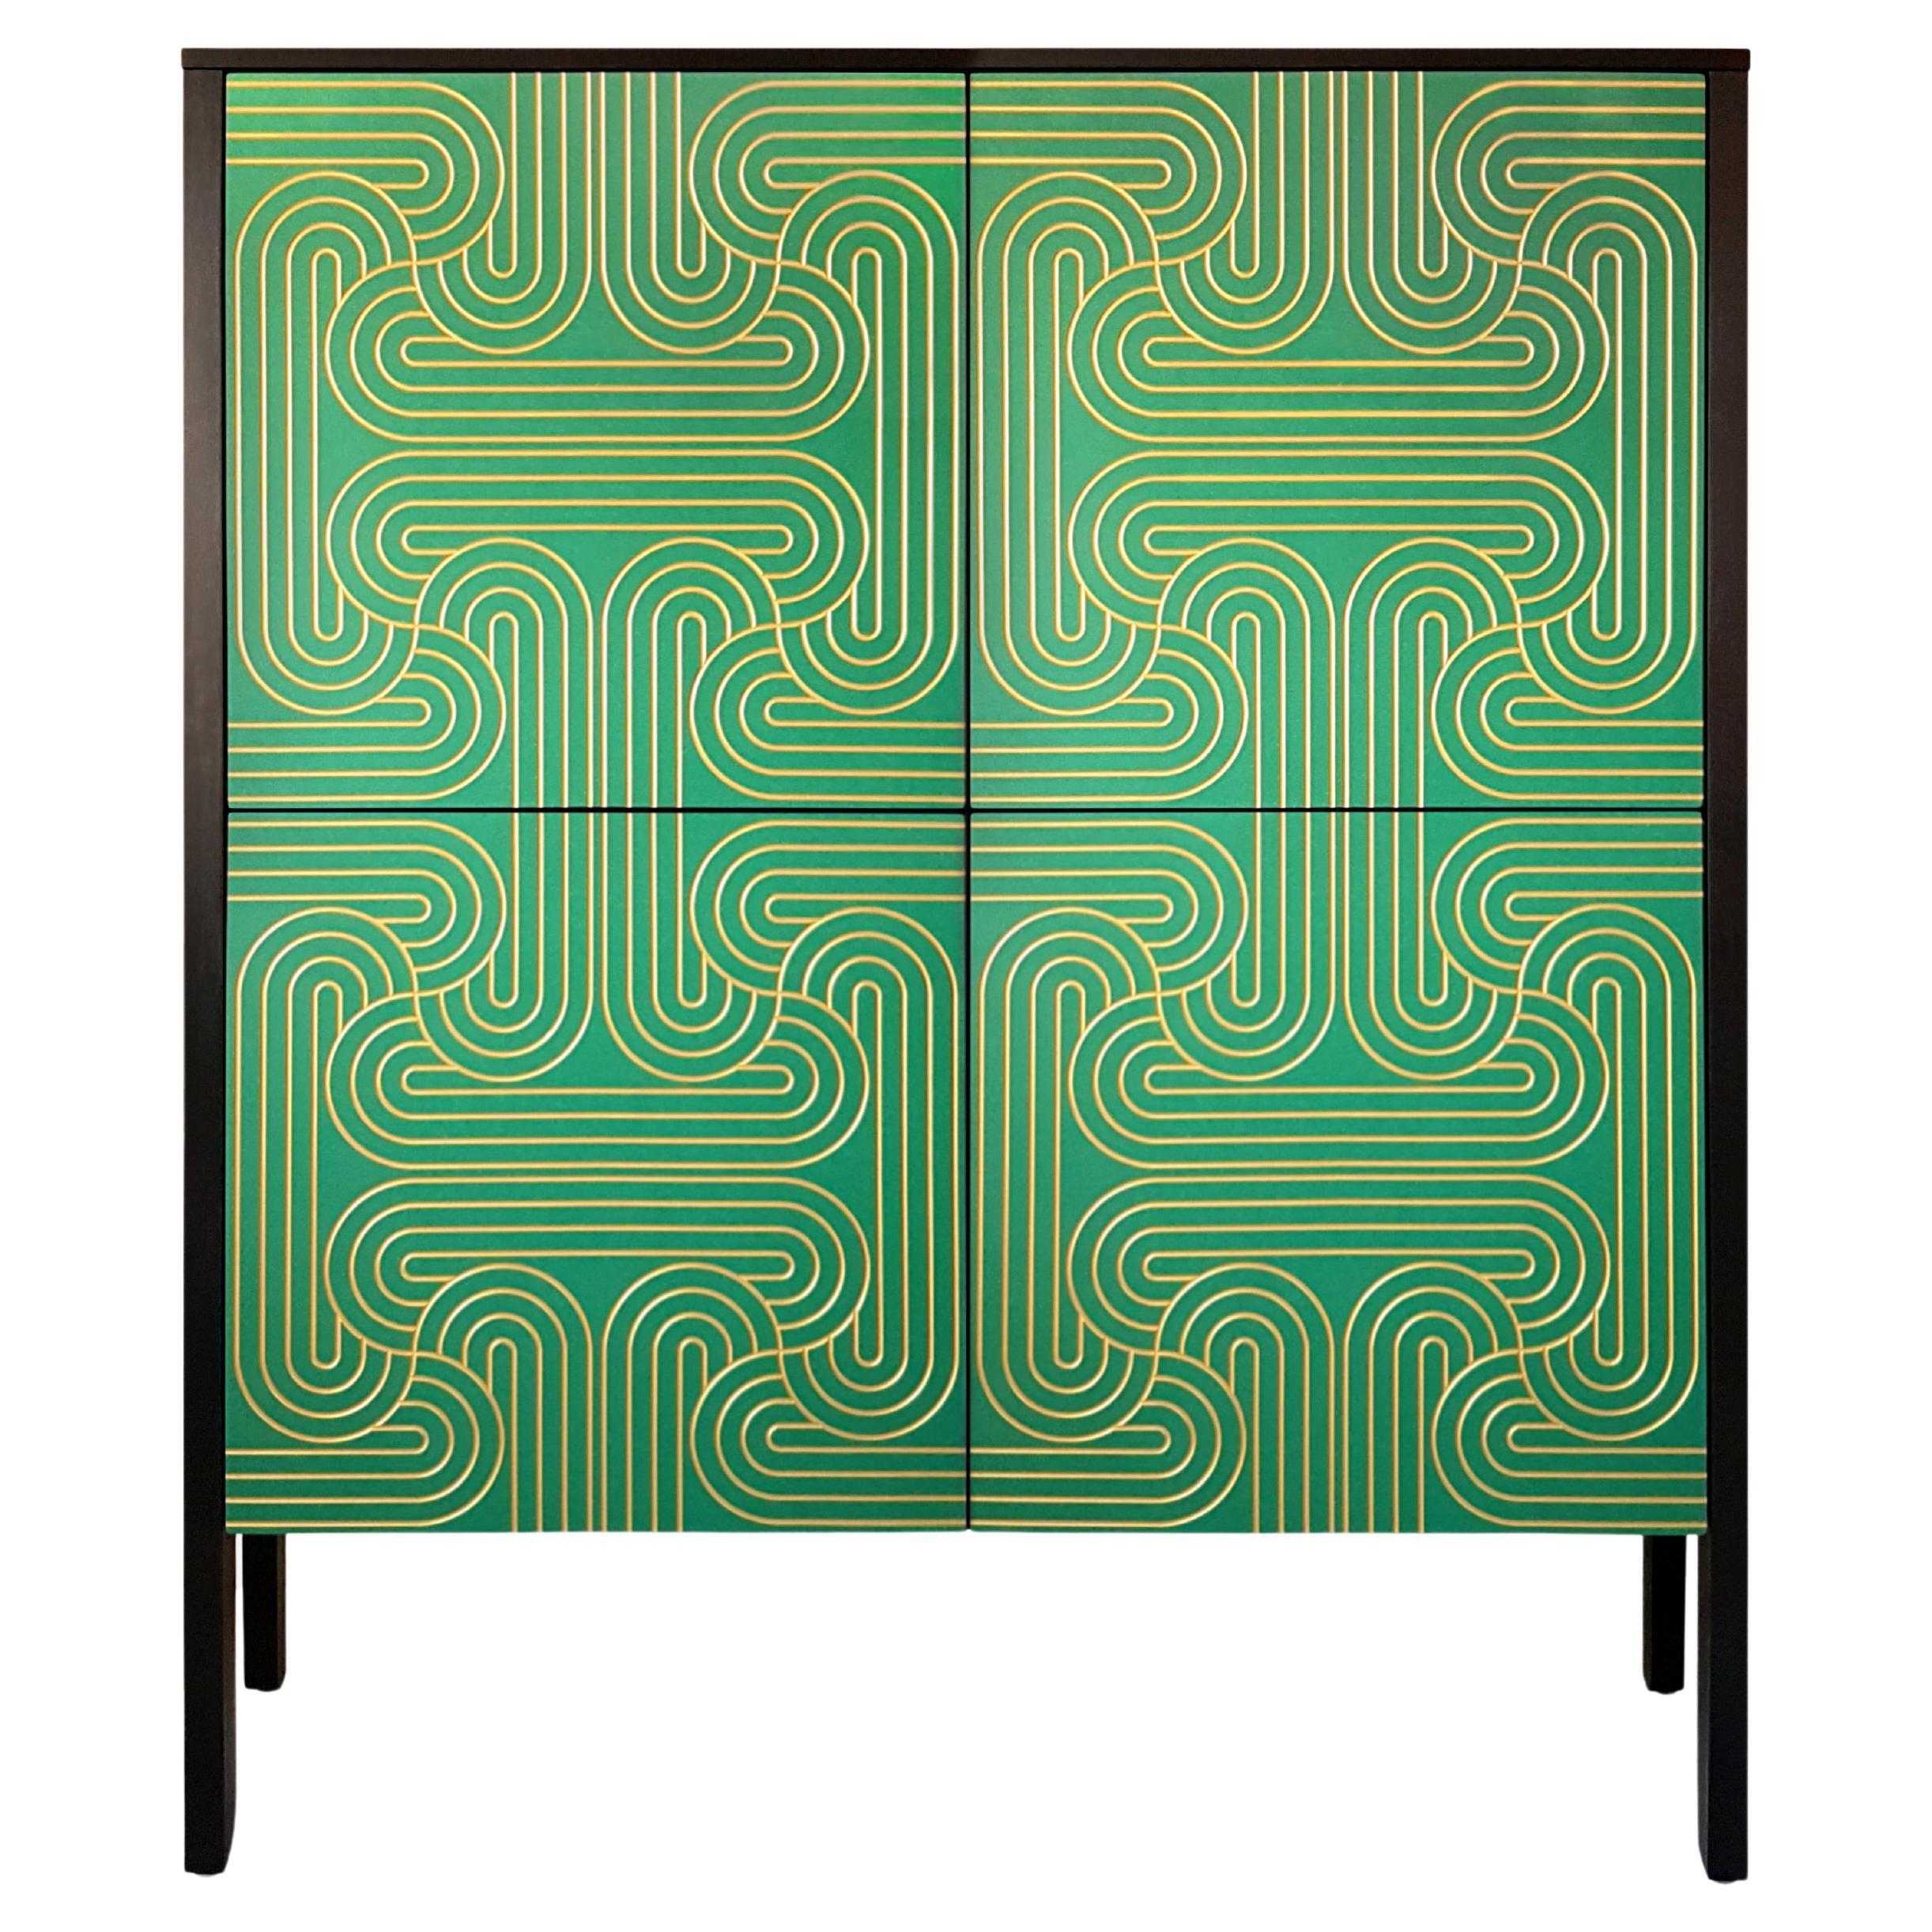 CoucouManou is a small Furniture design and manufacturing company based in the UK which uses pattern and colour in the designs resulting in some striking and elegant pieces of furniture.
The beautiful Loop cabinets in green, blue or black have the